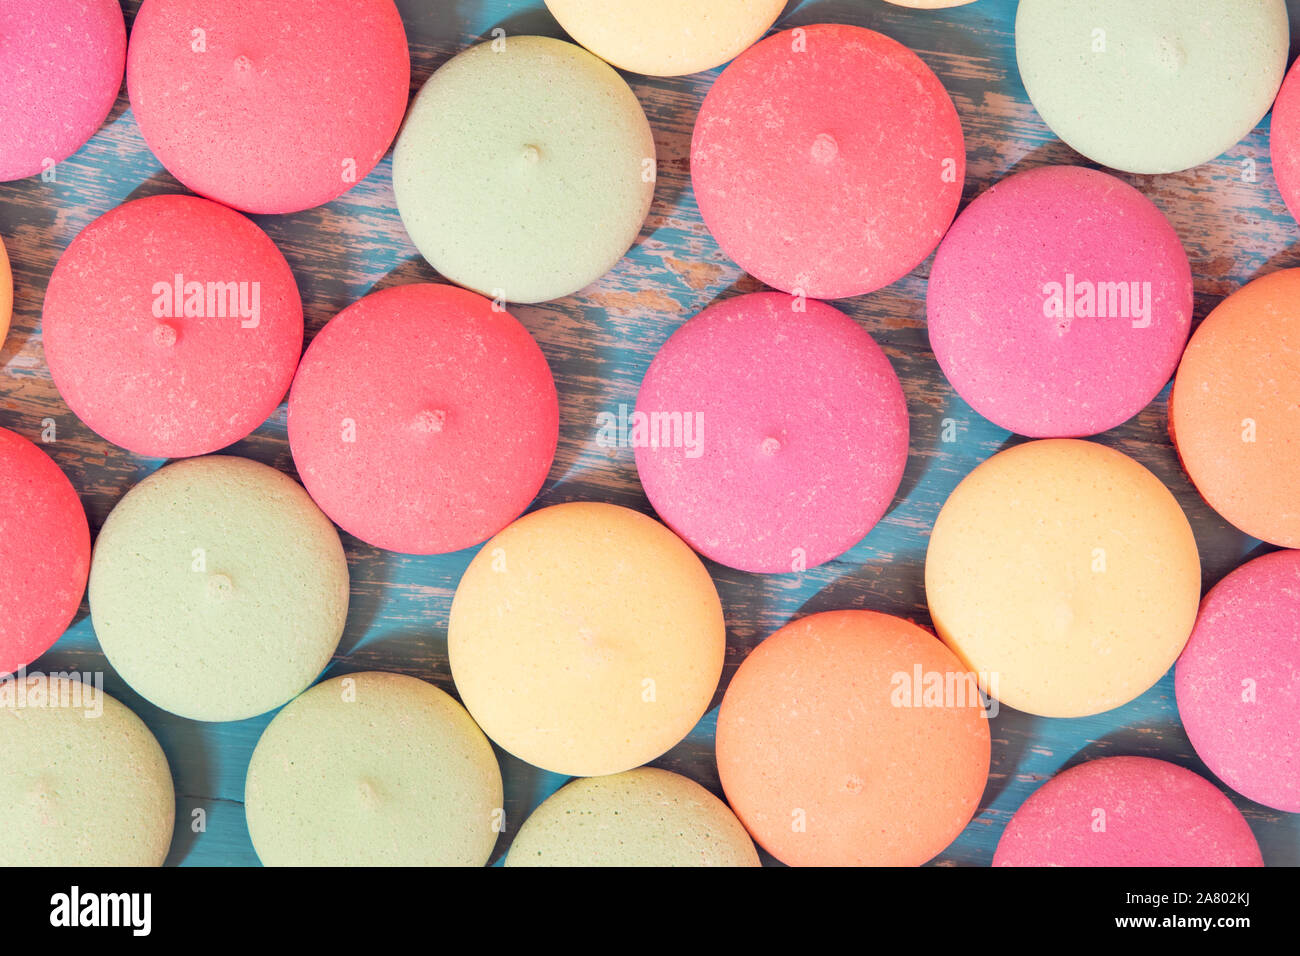 Topview, colorful and variously tasty cookies or biscuit, concept confectionery Stock Photo